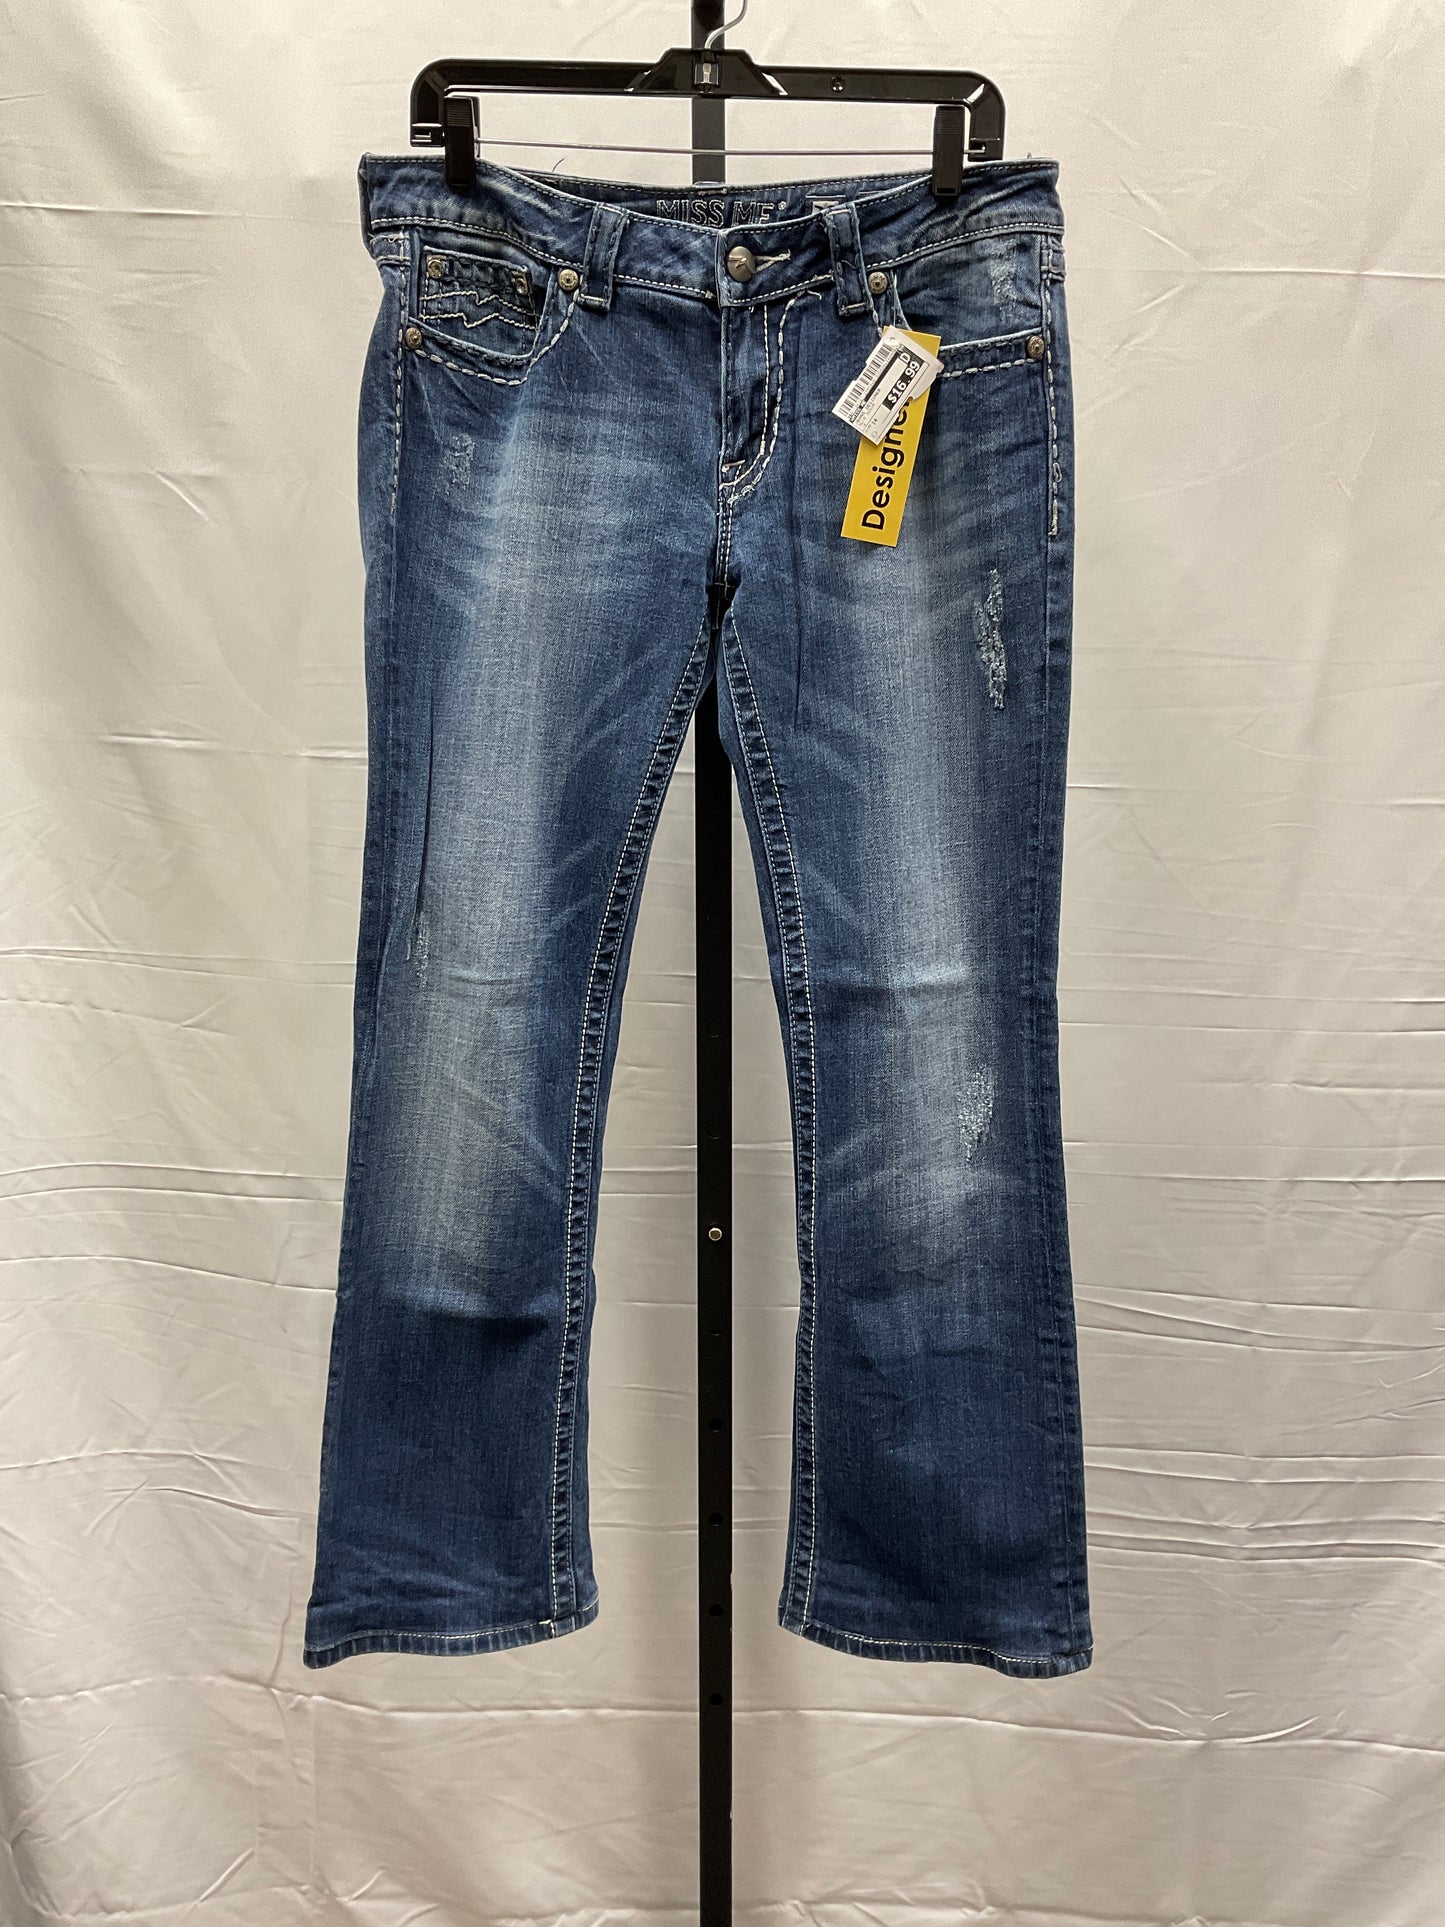 Jeans Designer By Miss Me  Size: 14